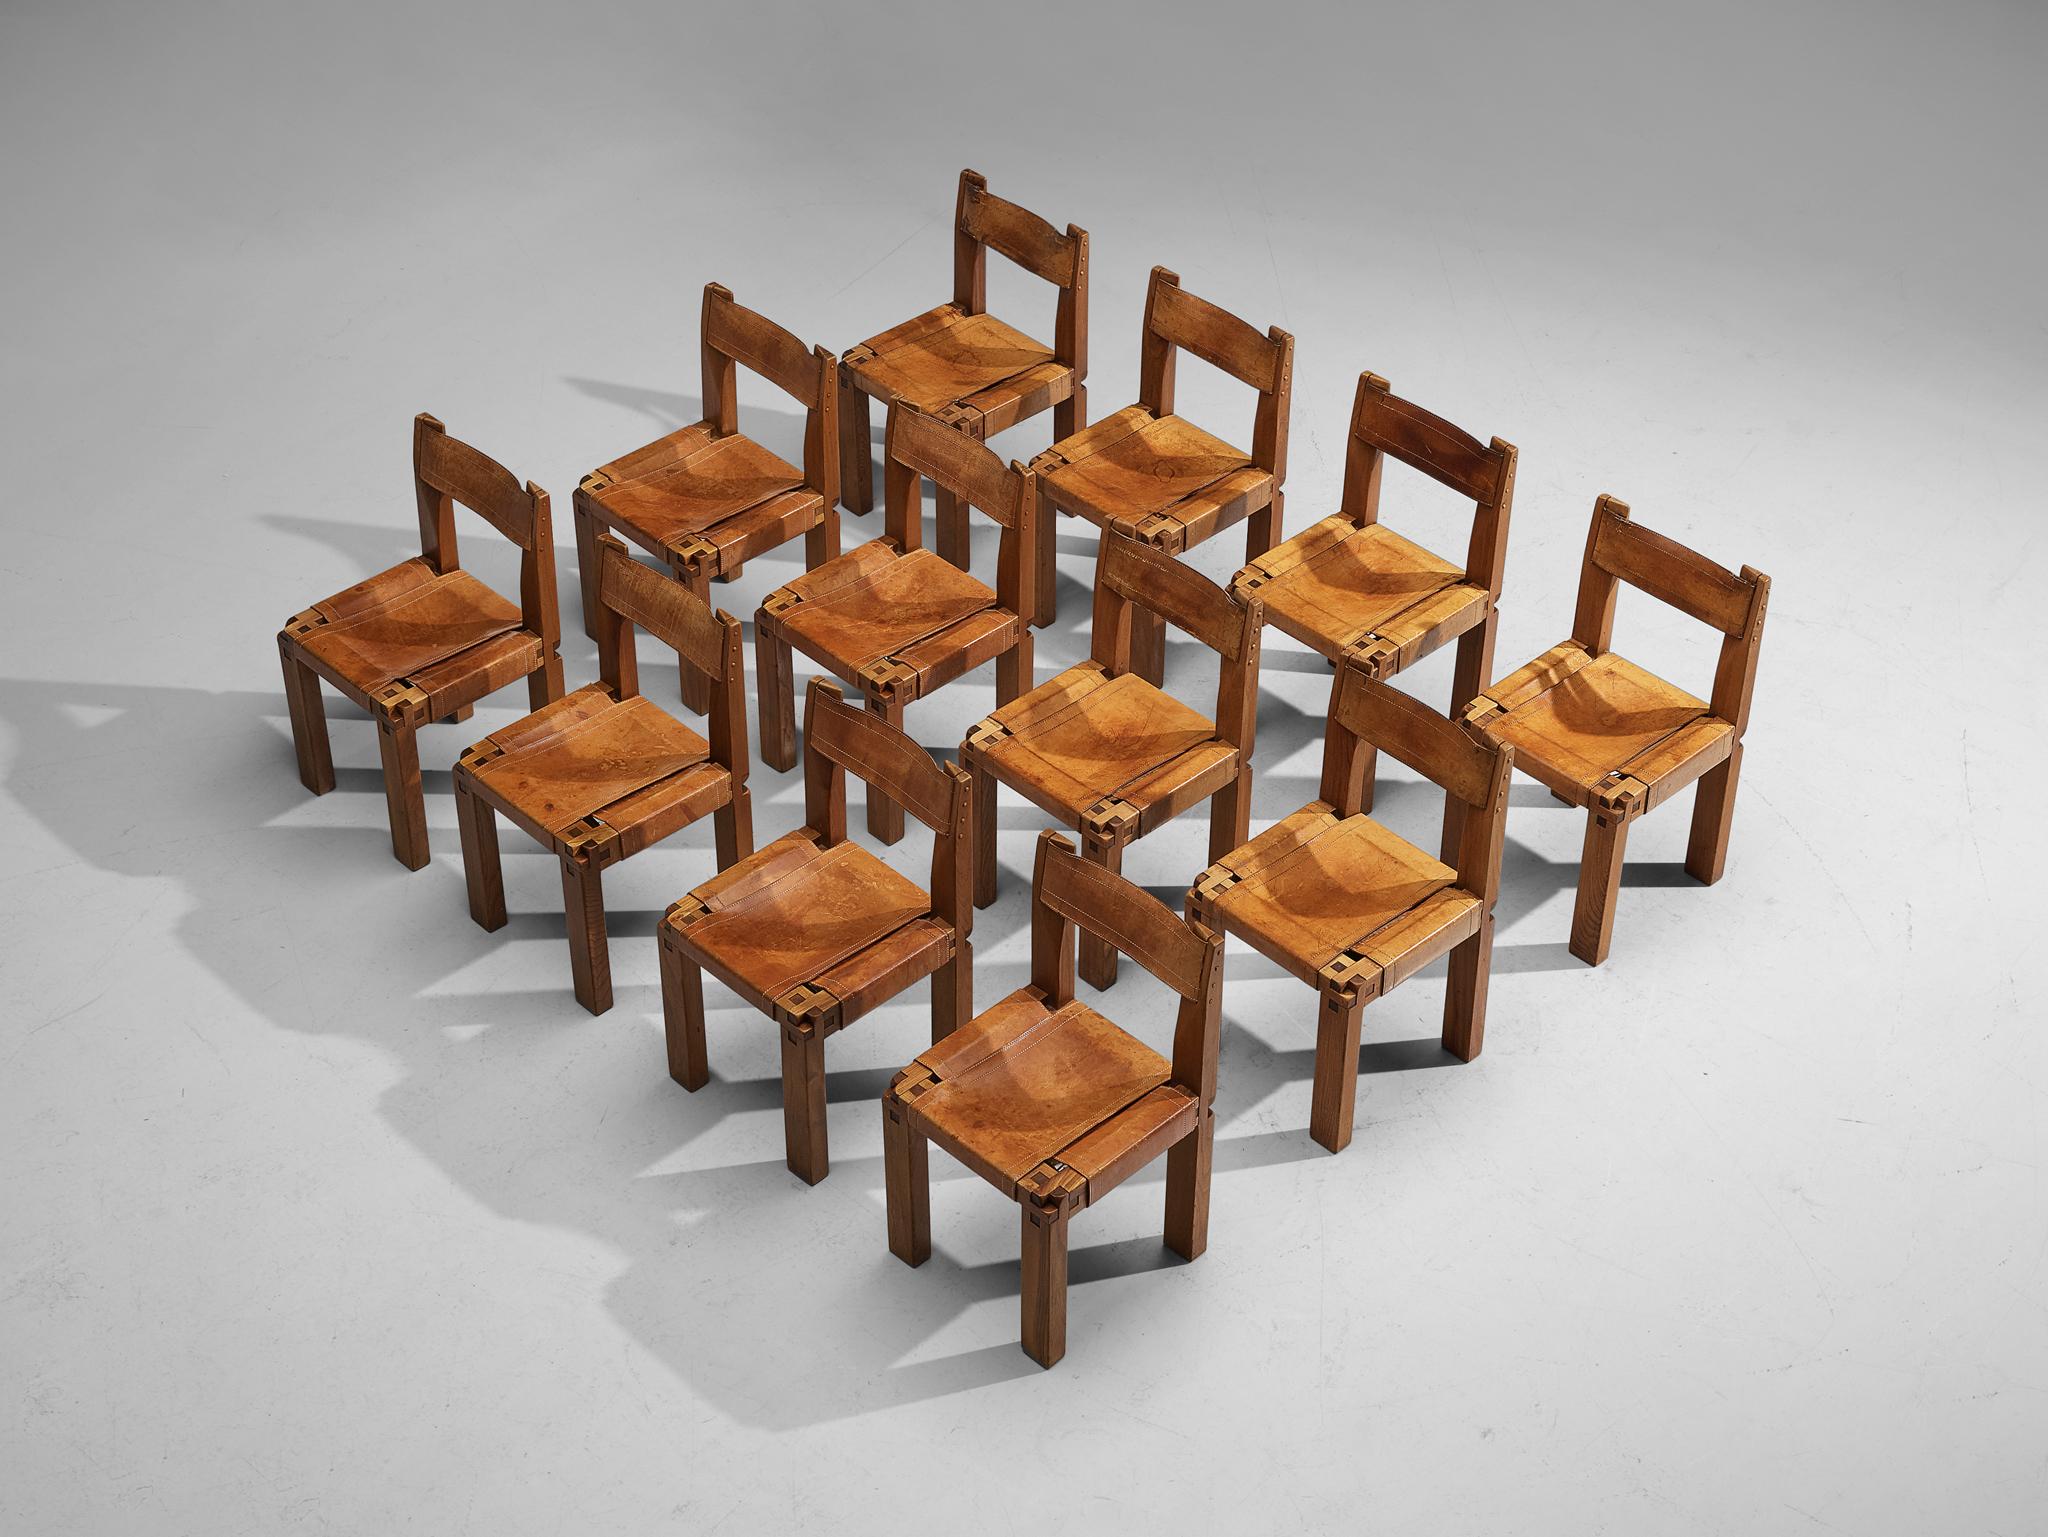 Pierre Chapo, set of twelve dining chairs model 'S11', elm, leather, France, circa 1966.

A set of twelve chairs in solid elmwood with cognac leather seating and back, designed by French designer Pierre Chapo. The chairs show absolutely stunning